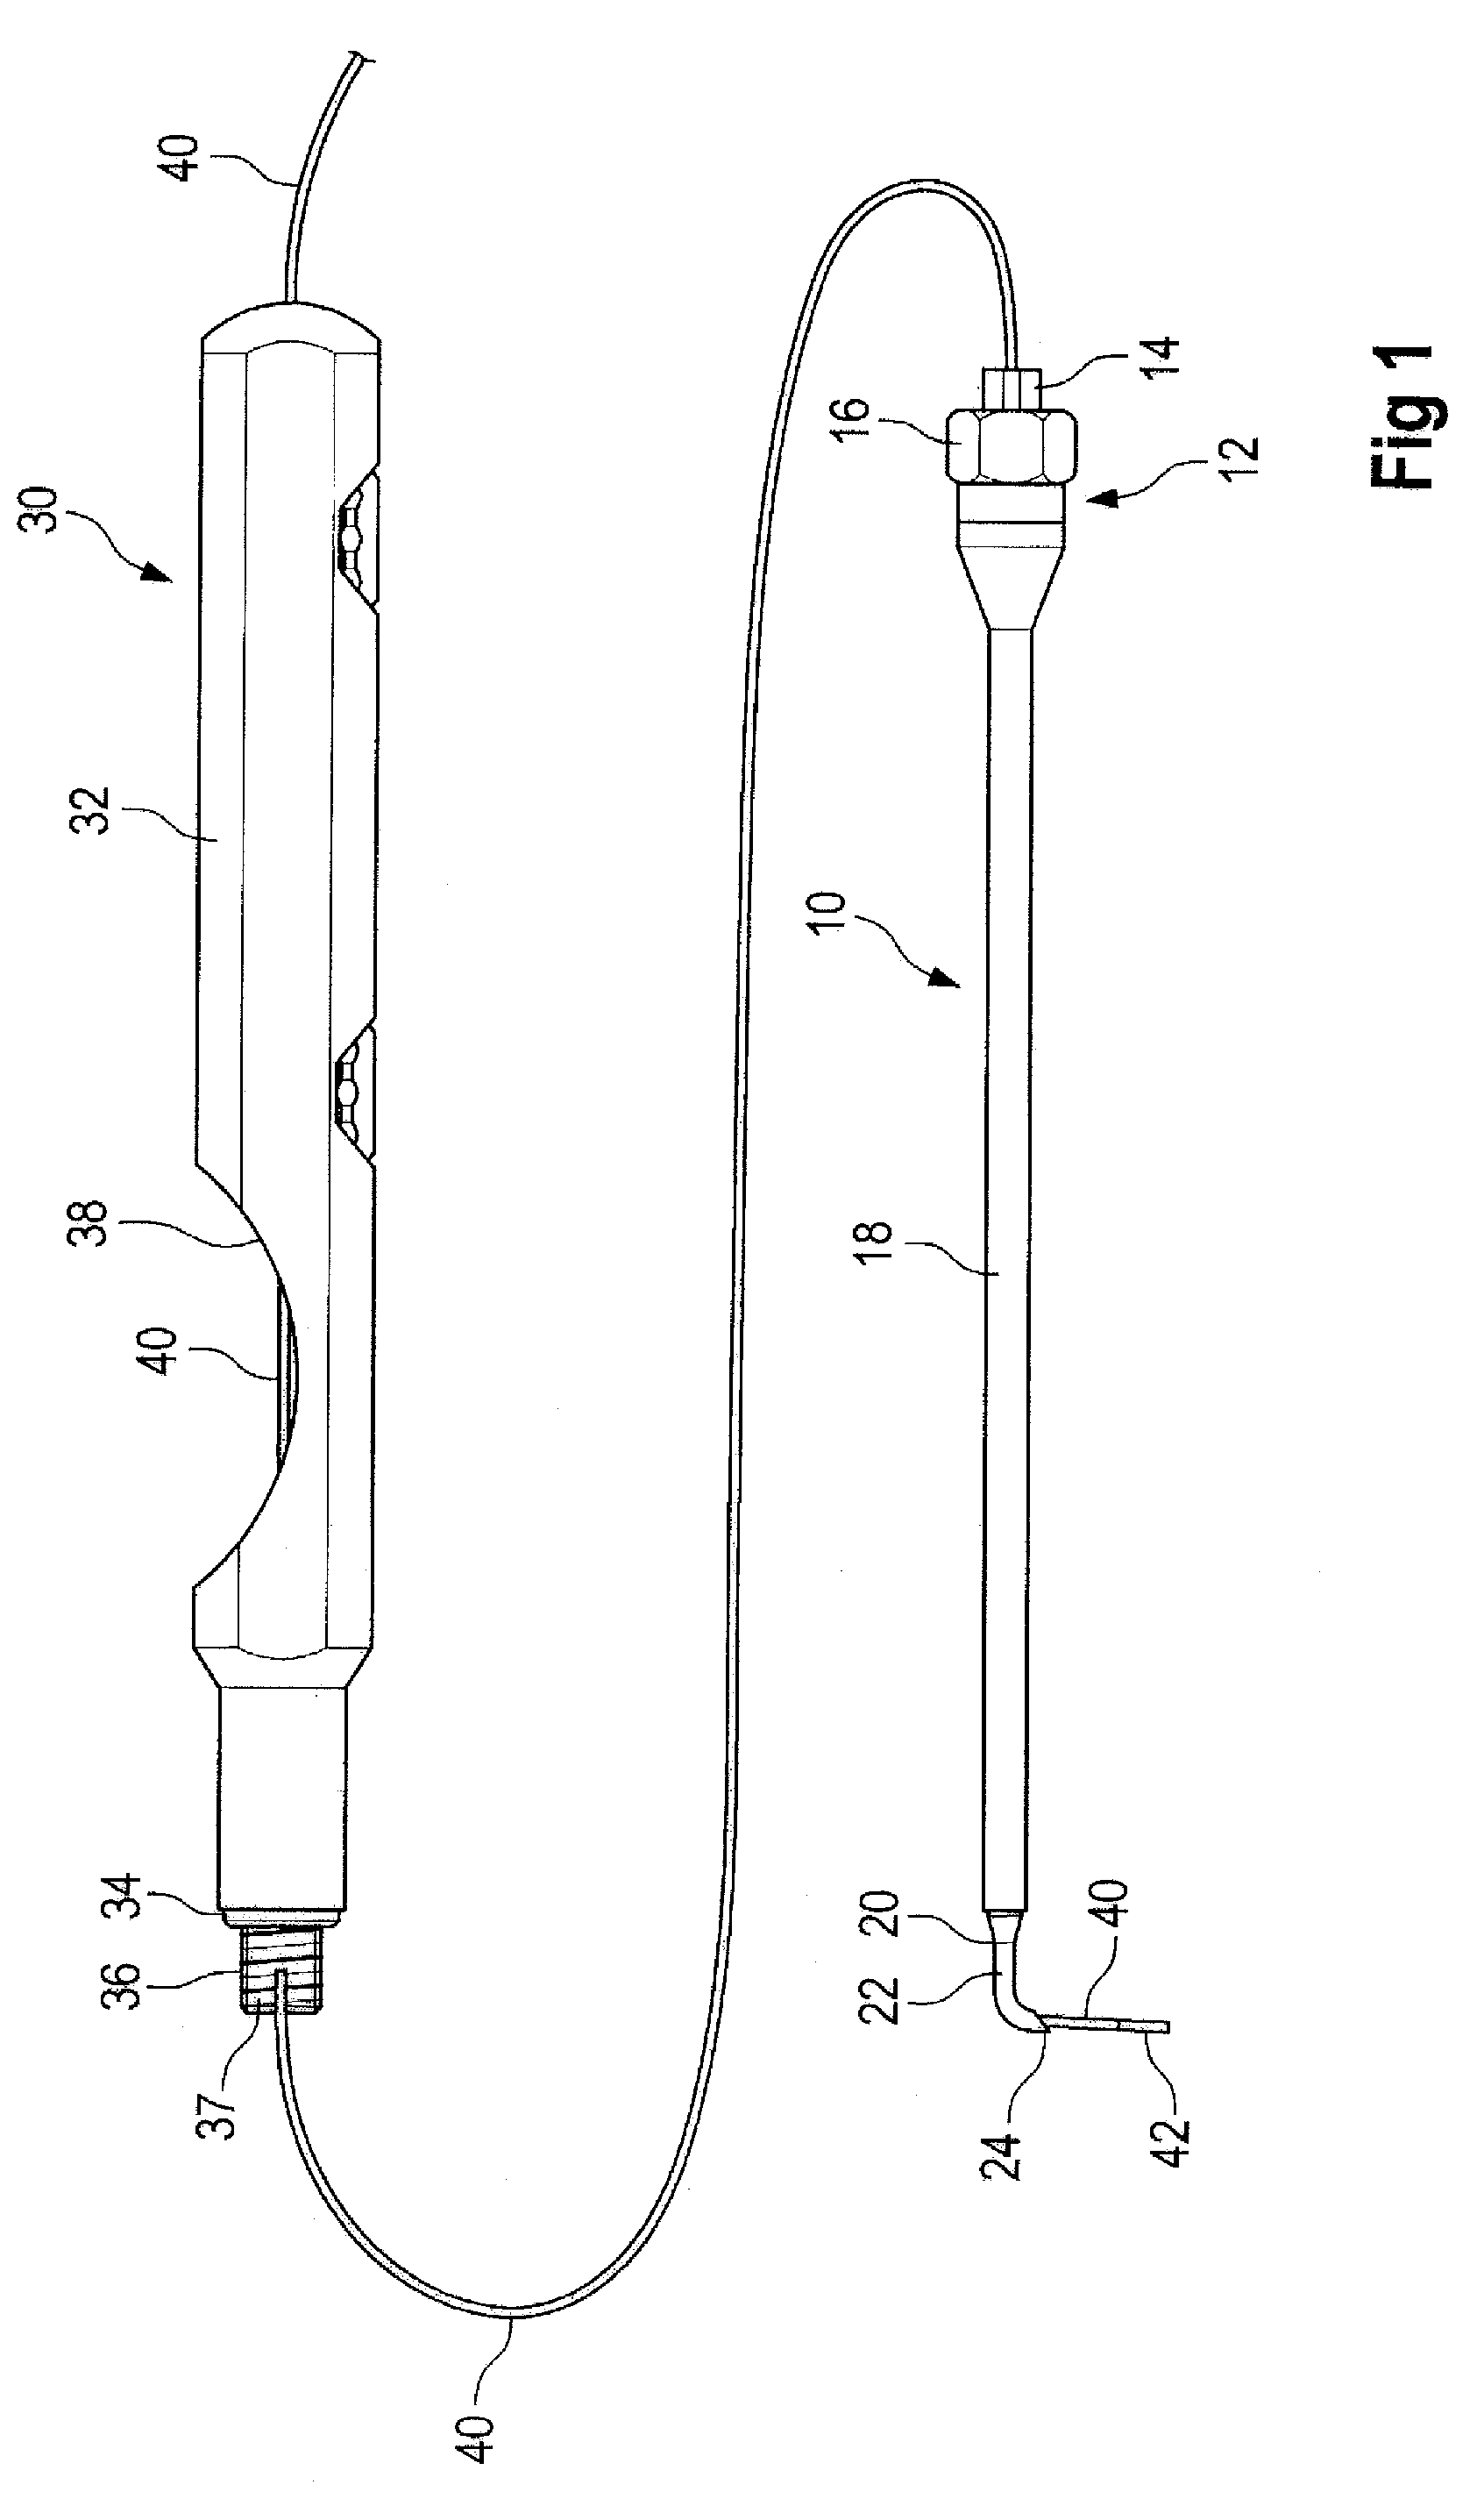 Needle Attachment For A Surgical Sewing Instrument